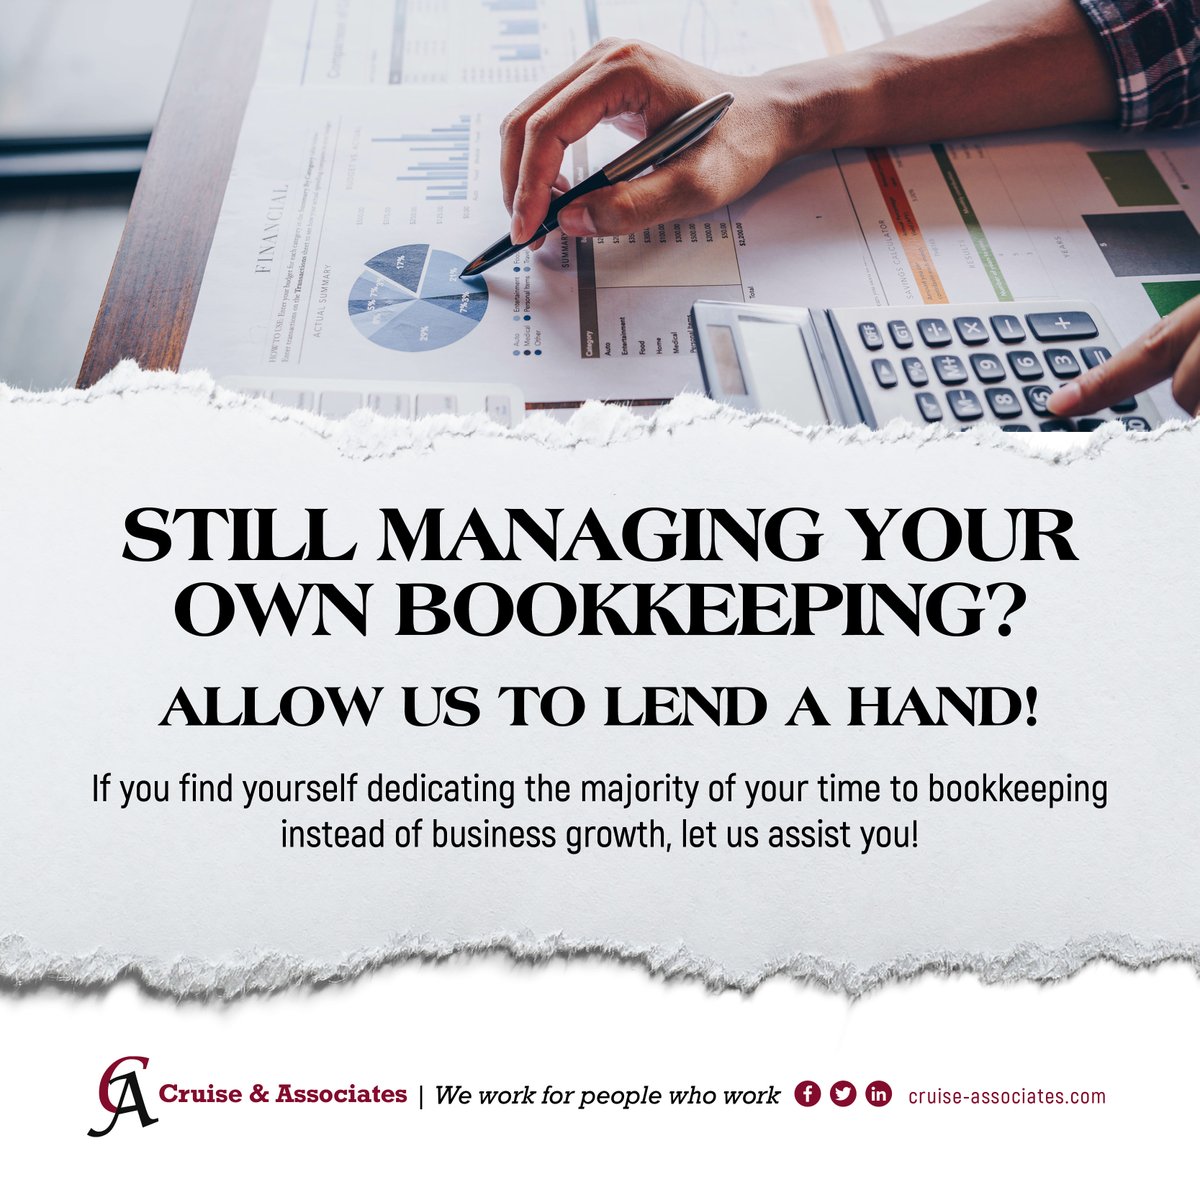 As a business owner, delegate bookkeeping to us so you can focus on what matters most. Let's get started today!

#CruiseandAssociates #Bookkeeping #FinancialManagement #Accounting #BalancingBooks #FinancialRecords #Budgeting #FinancialAccuracy #CashFlow #AccountingServices